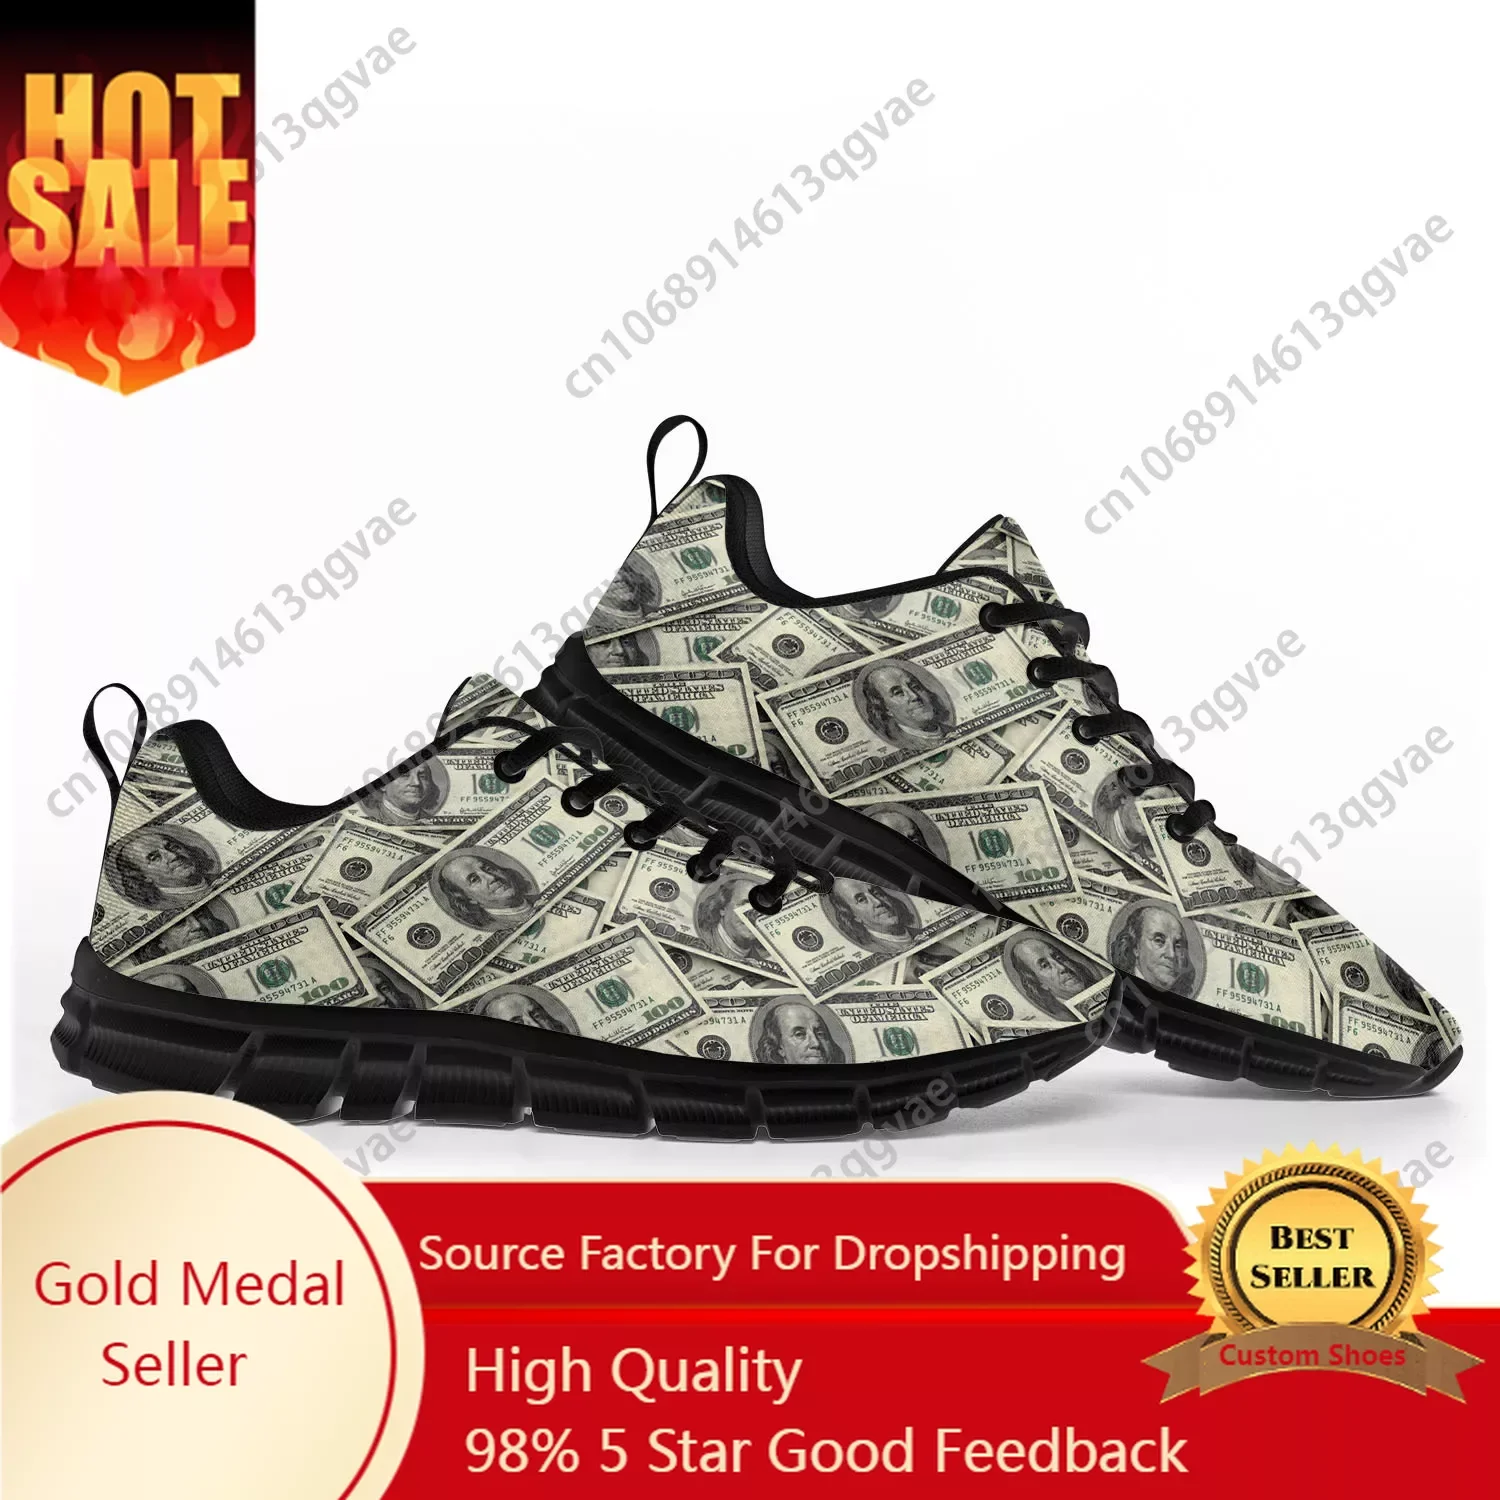 Dollar Printed Popular Sports Shoes Mens Womens Teenager Kids Children Sneakers Casual Custom High Quality Couple Shoes Black popular couple long sleeve hoodies serial experiments lain printed hot sale classic casual cotton high quality hip pop new wears